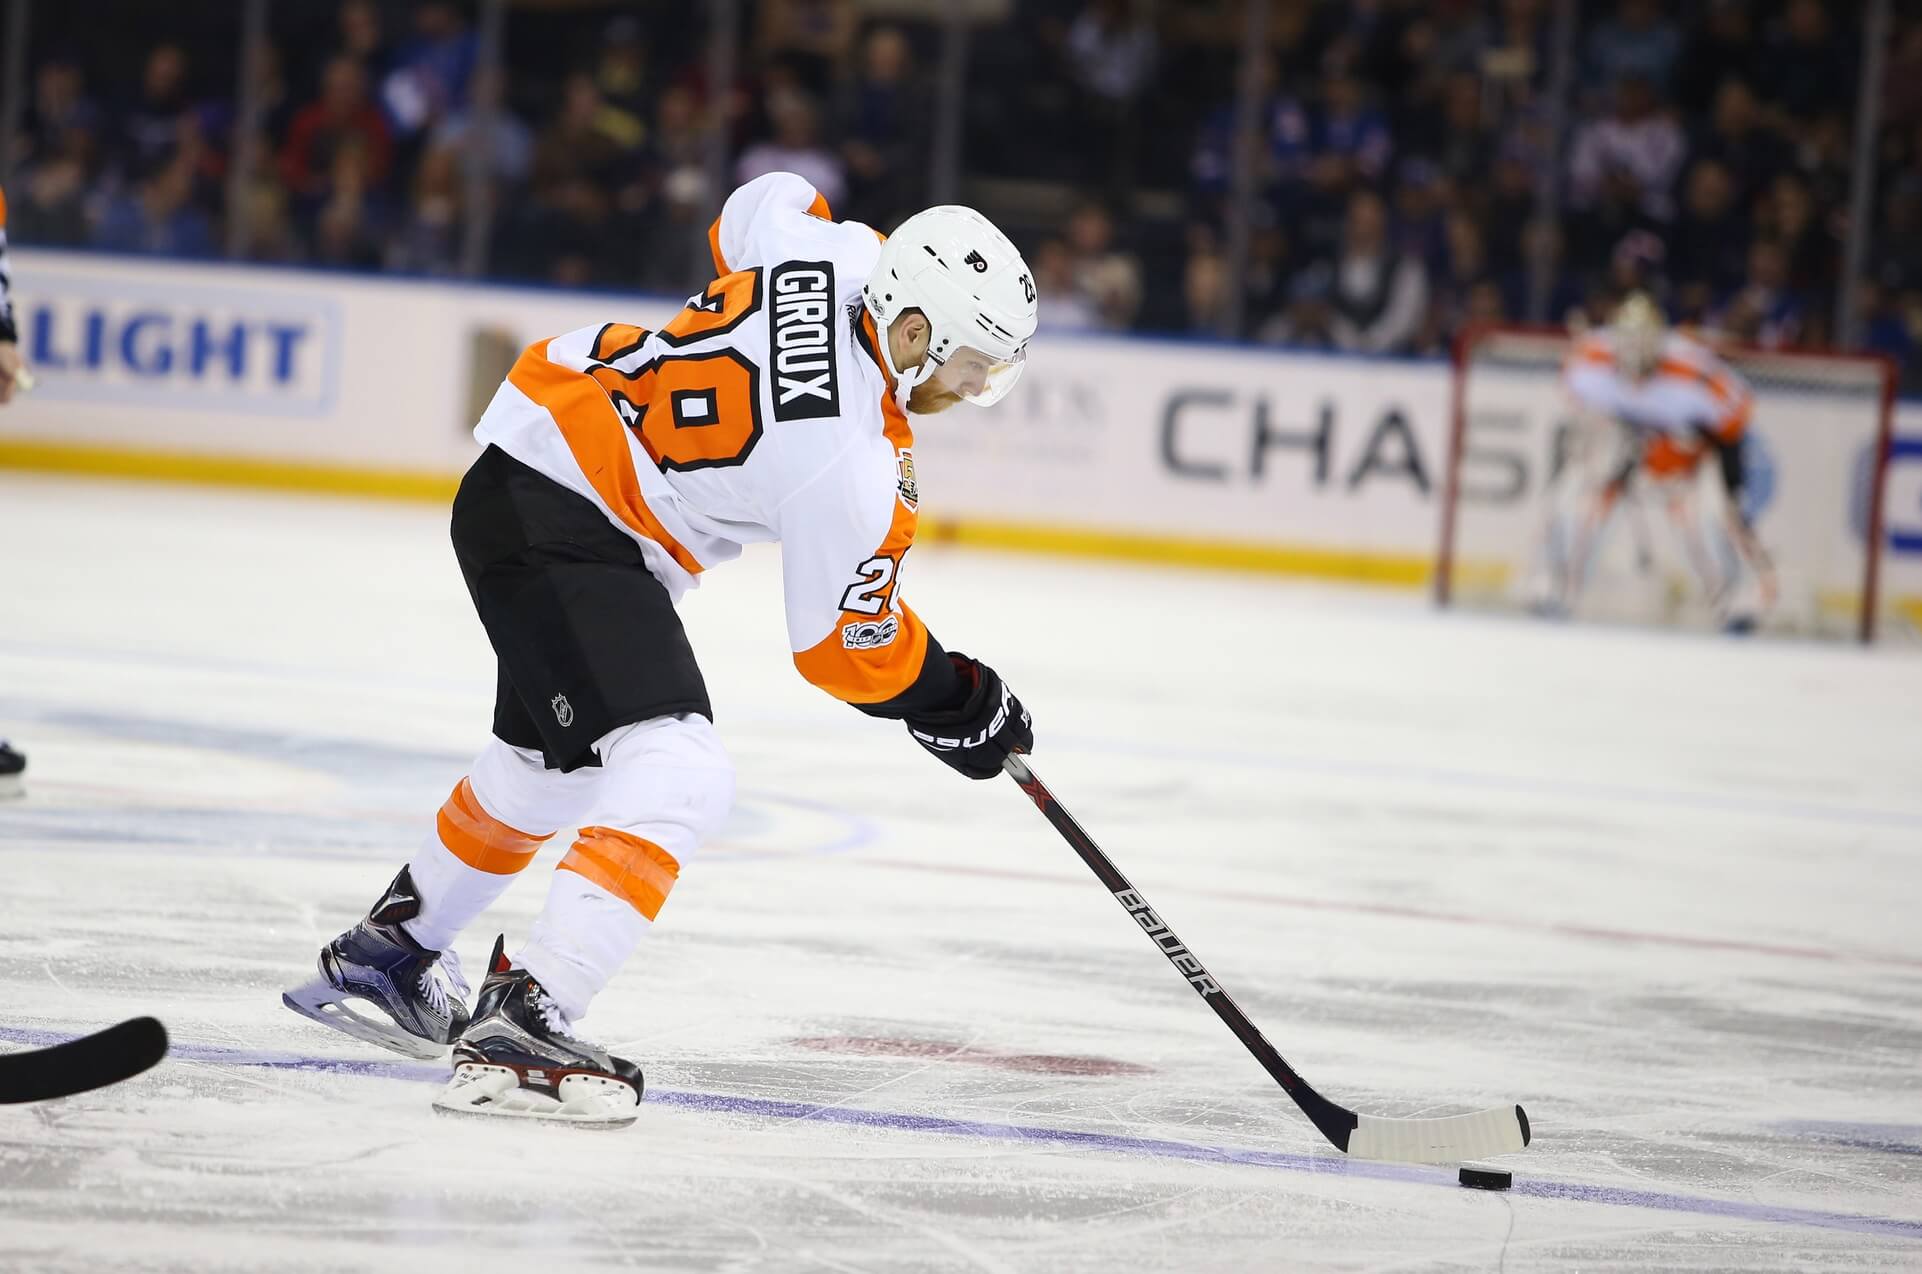 Does Claude Giroux Deserve This? - Edge of Philly Sports Network